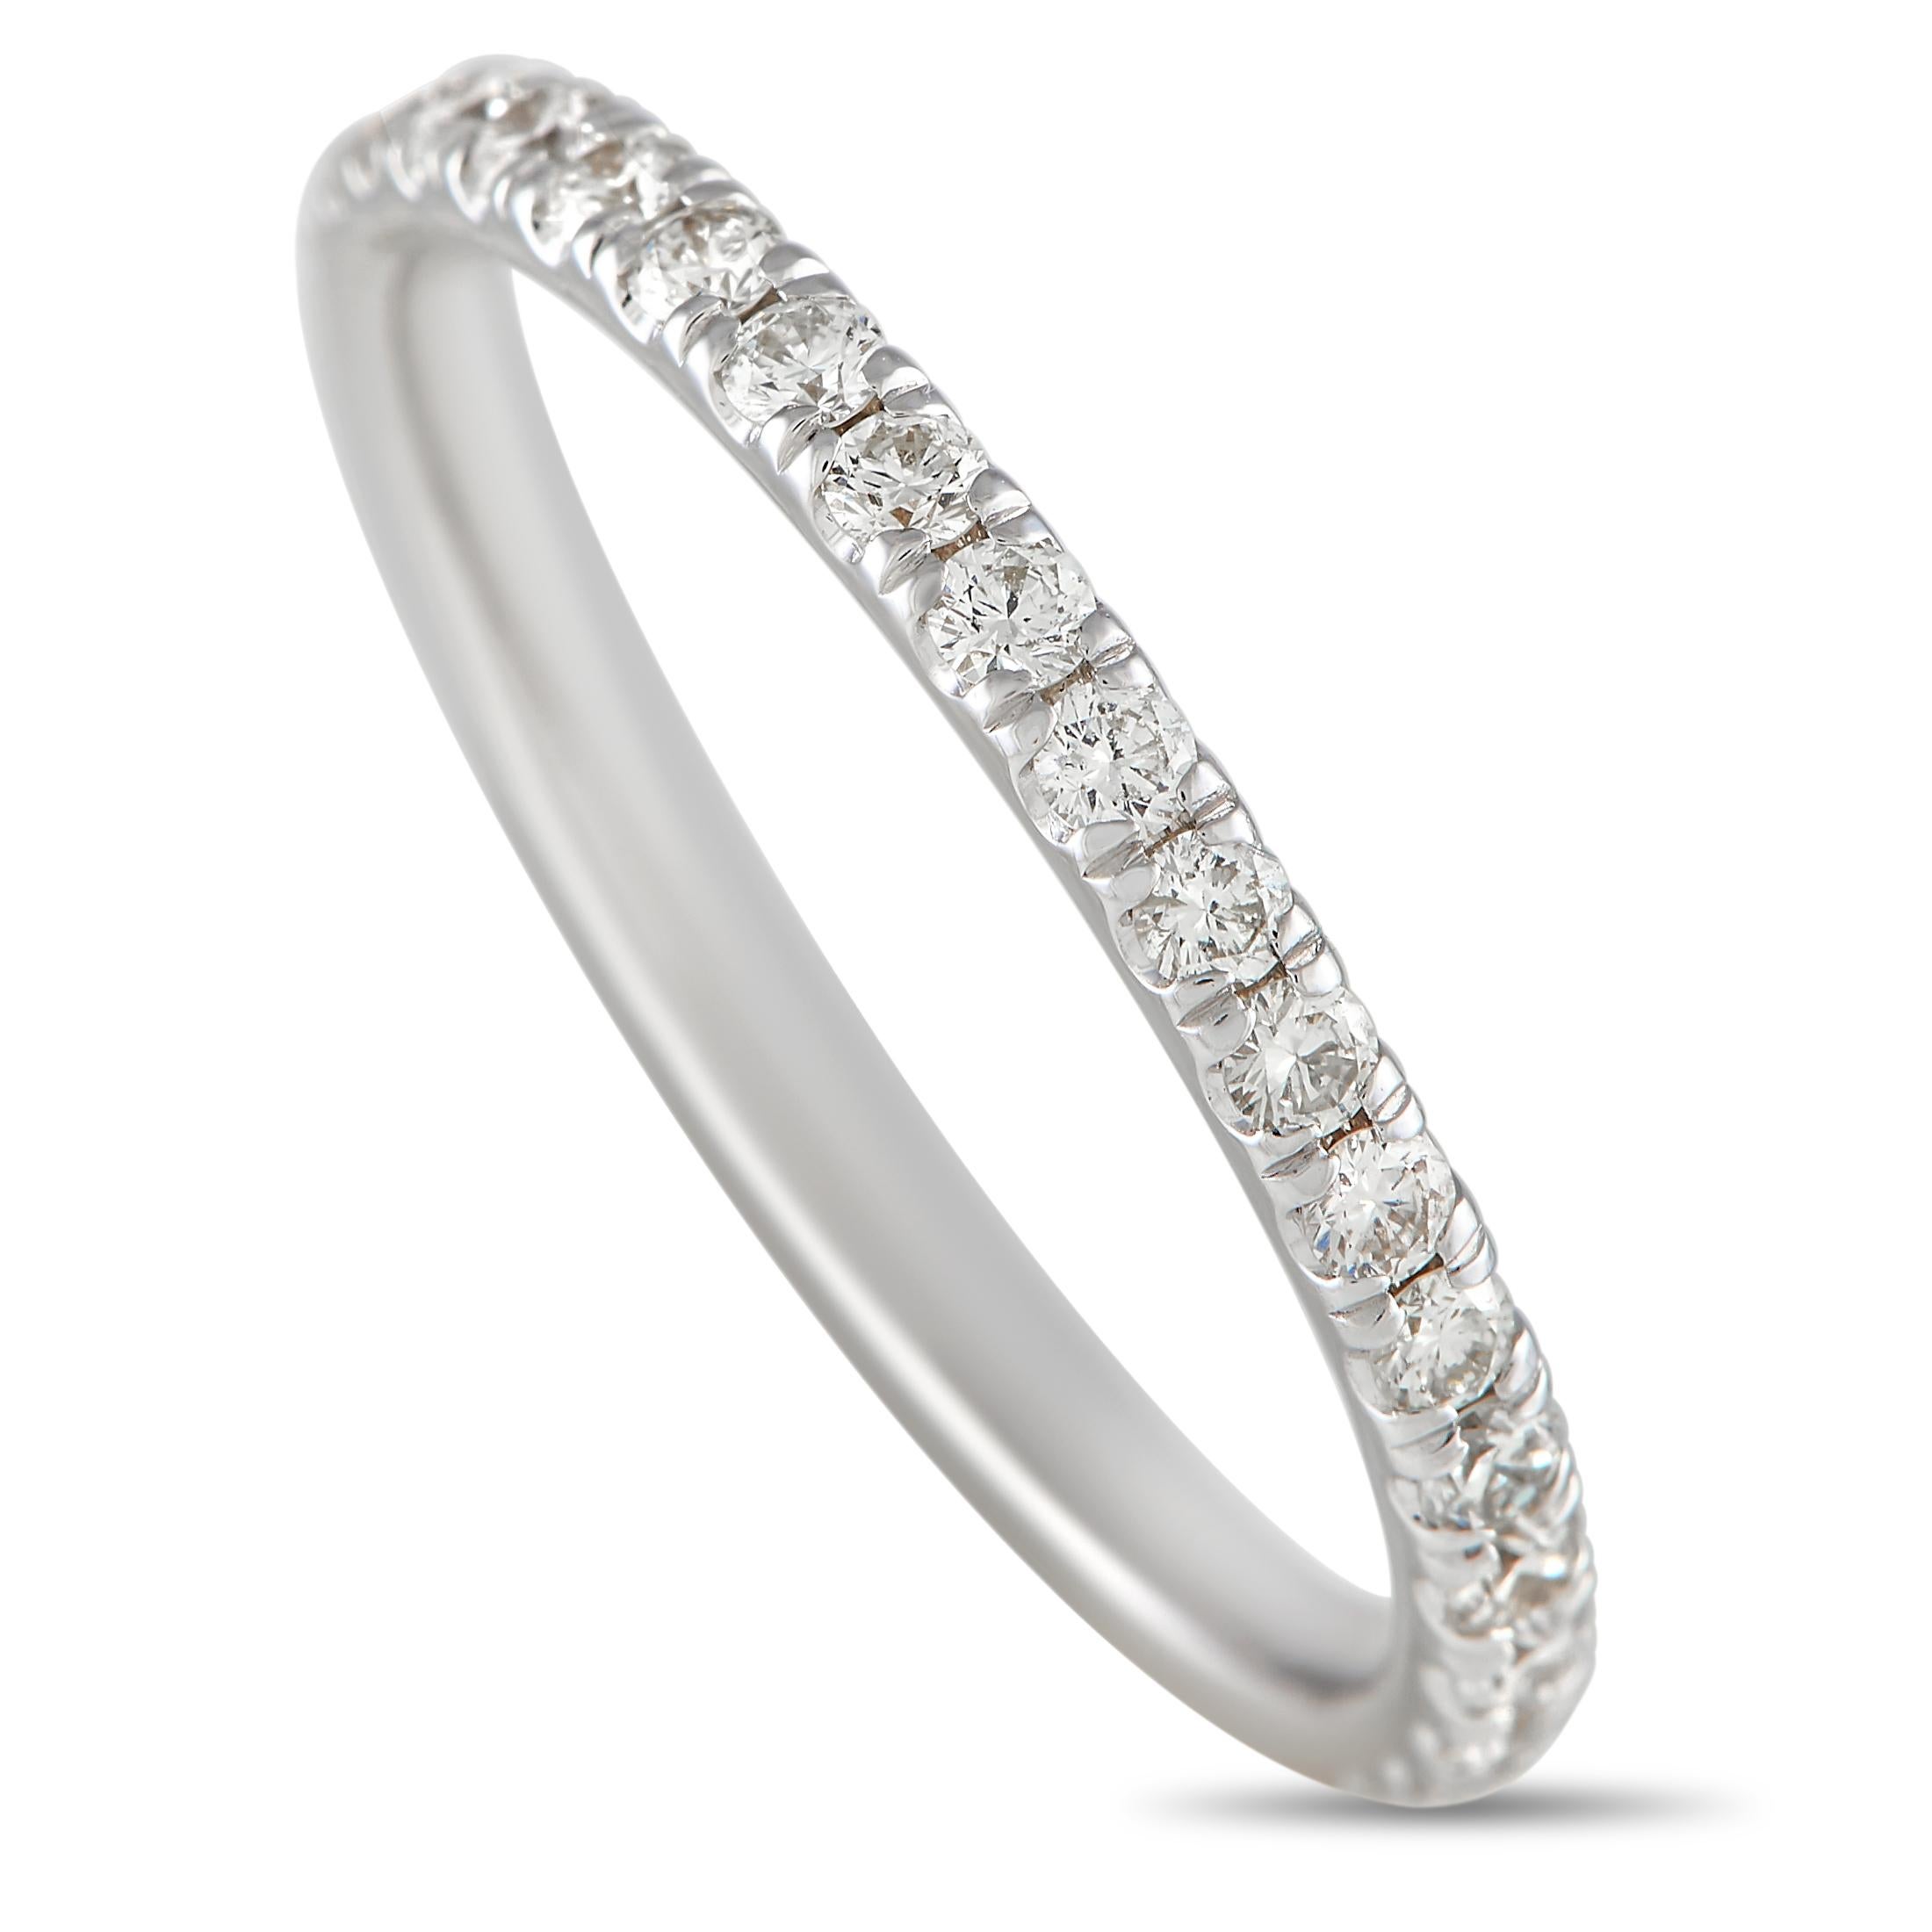 LB Exclusive 14k White Gold 0.63 Carat Diamond Eternity Band Ring In New Condition For Sale In Southampton, PA